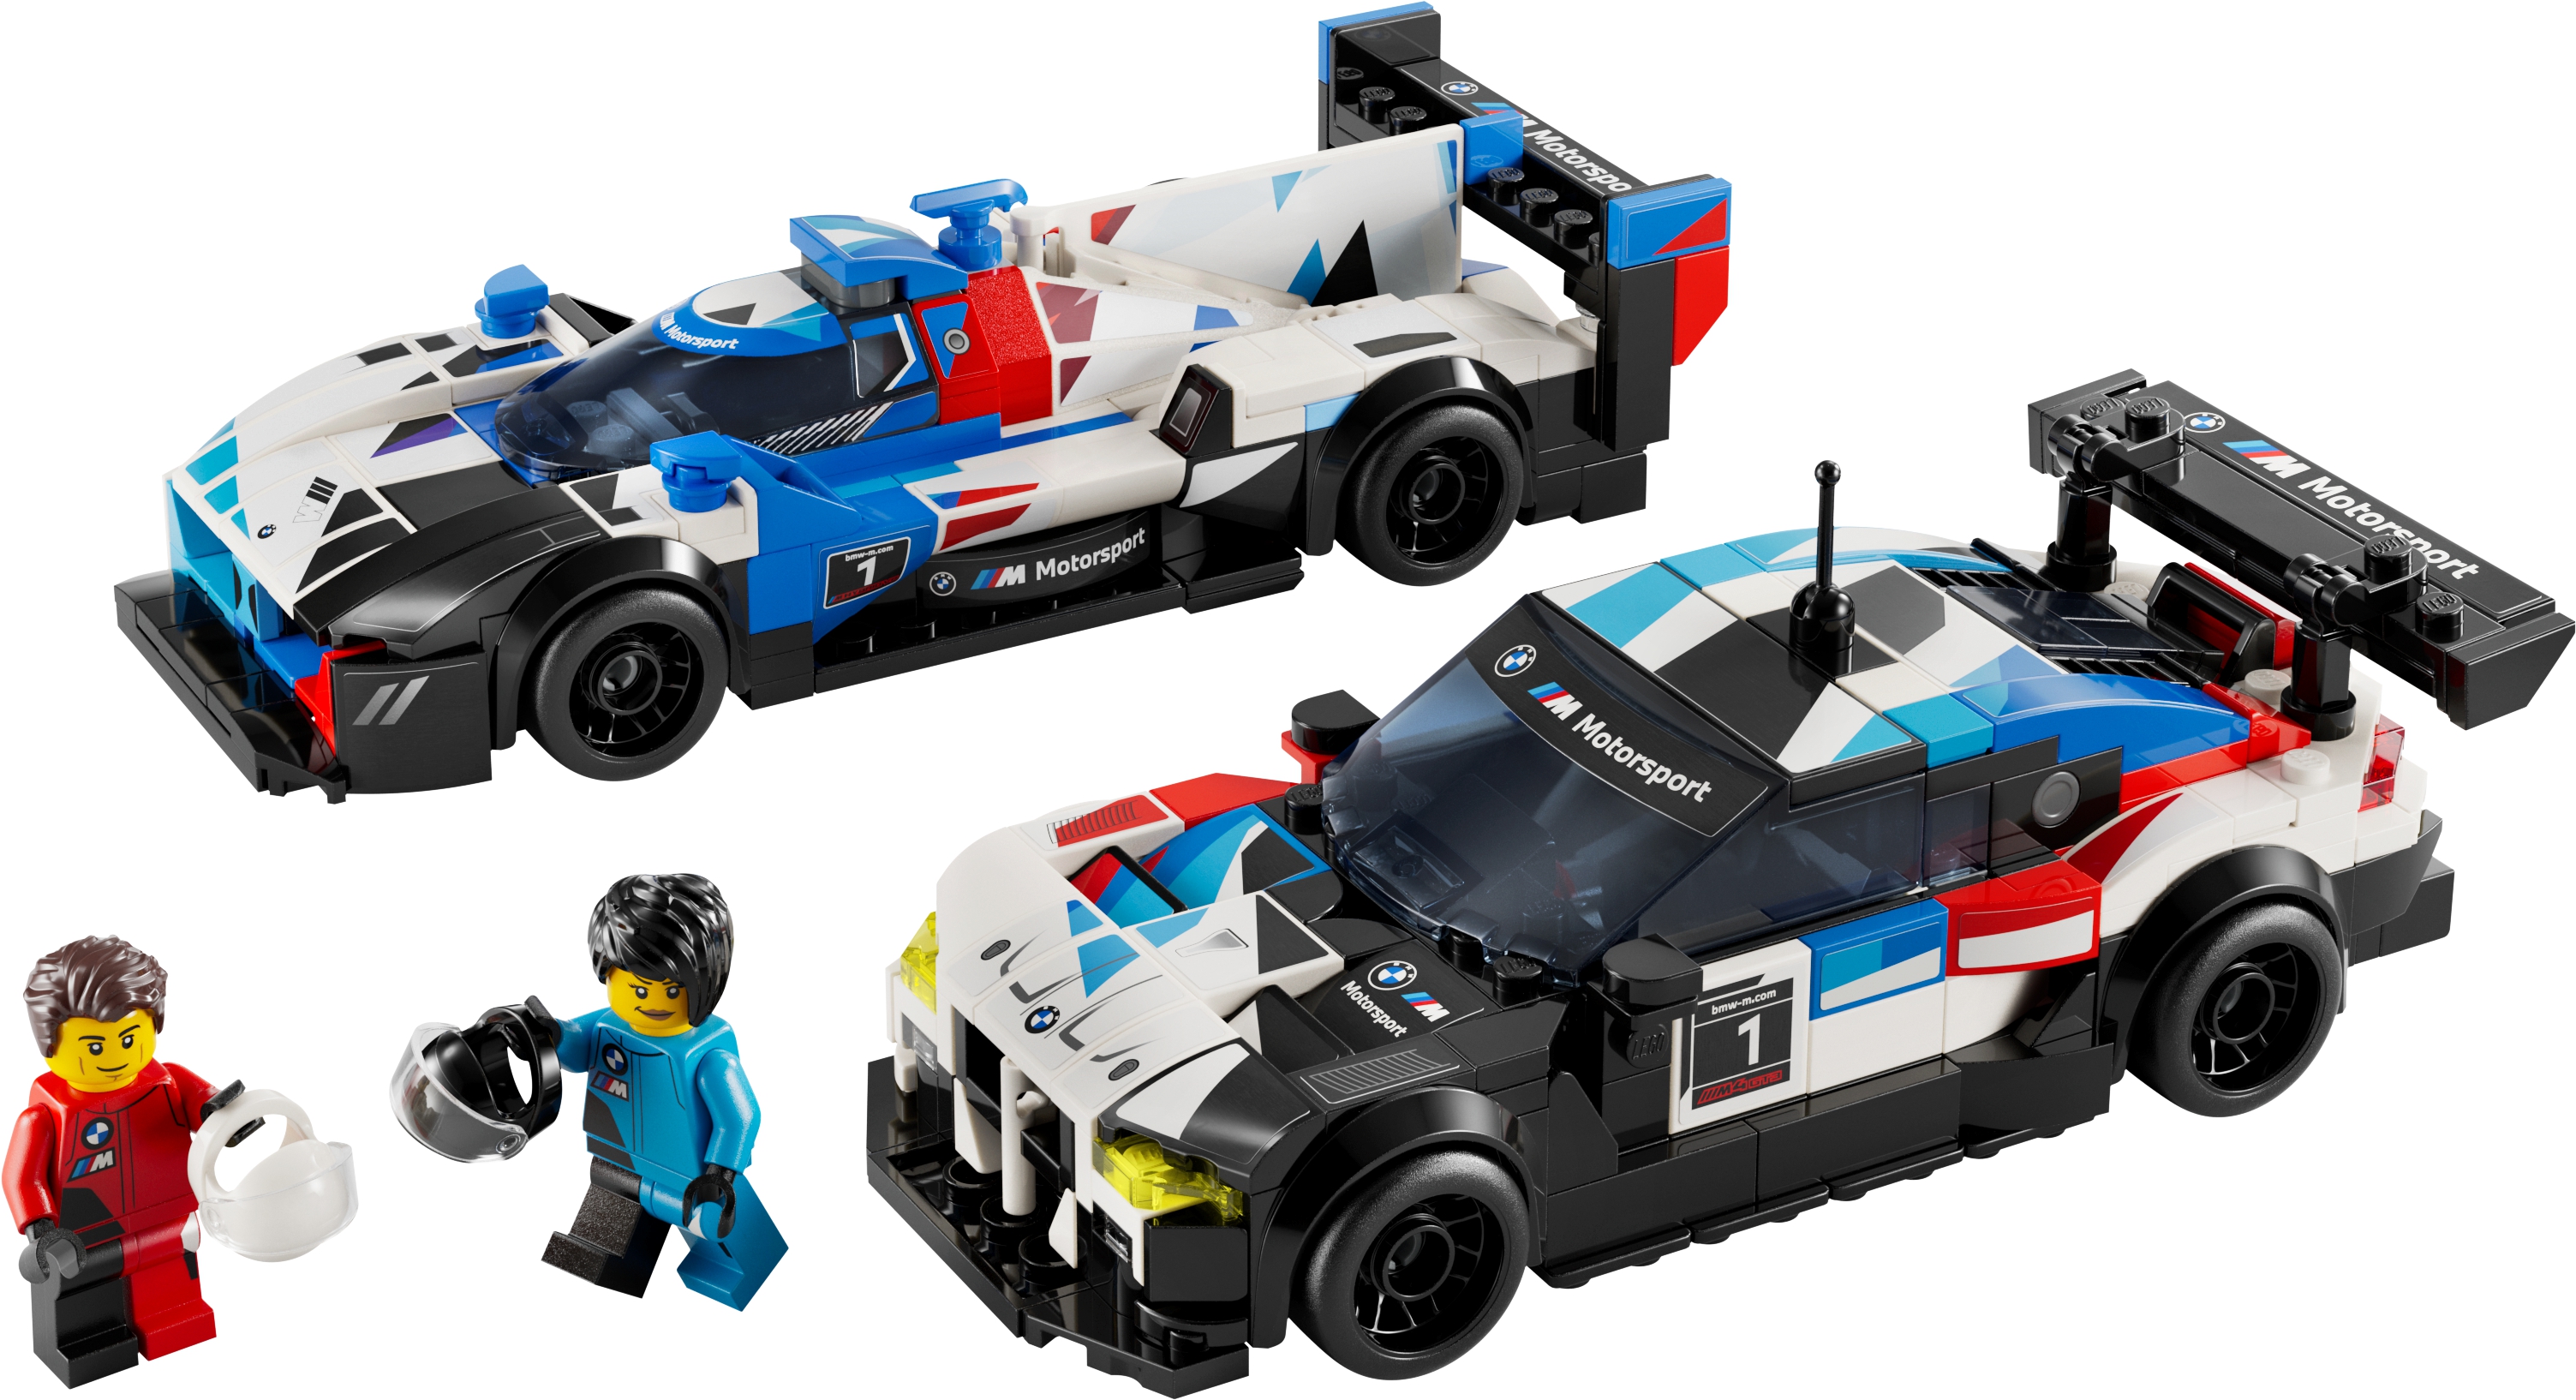 BMW M Motorsport and LEGO® celebrate passion for racing with a new model set.